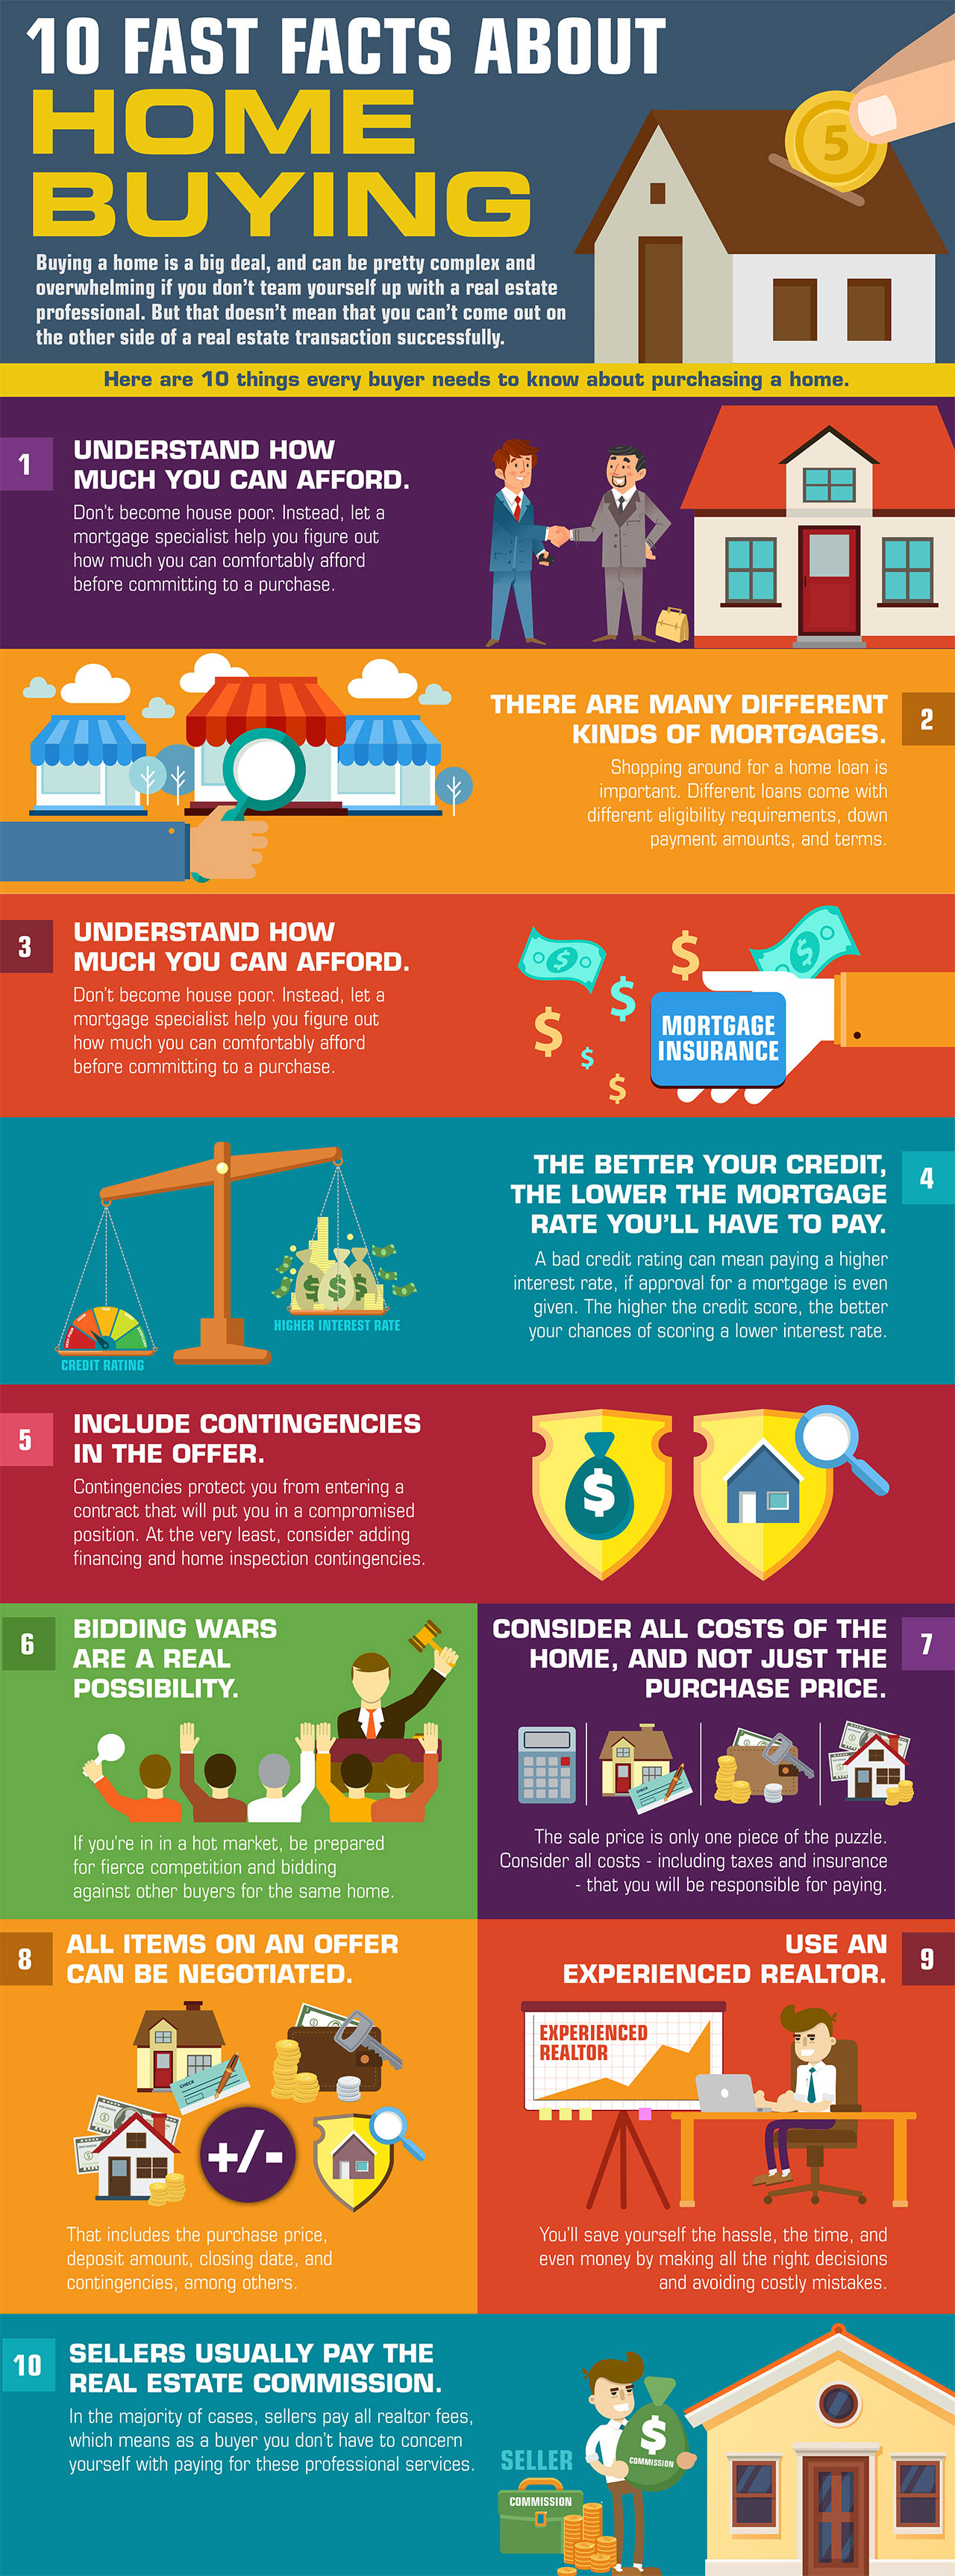 10-fast-facts-about-home-buying-infographic